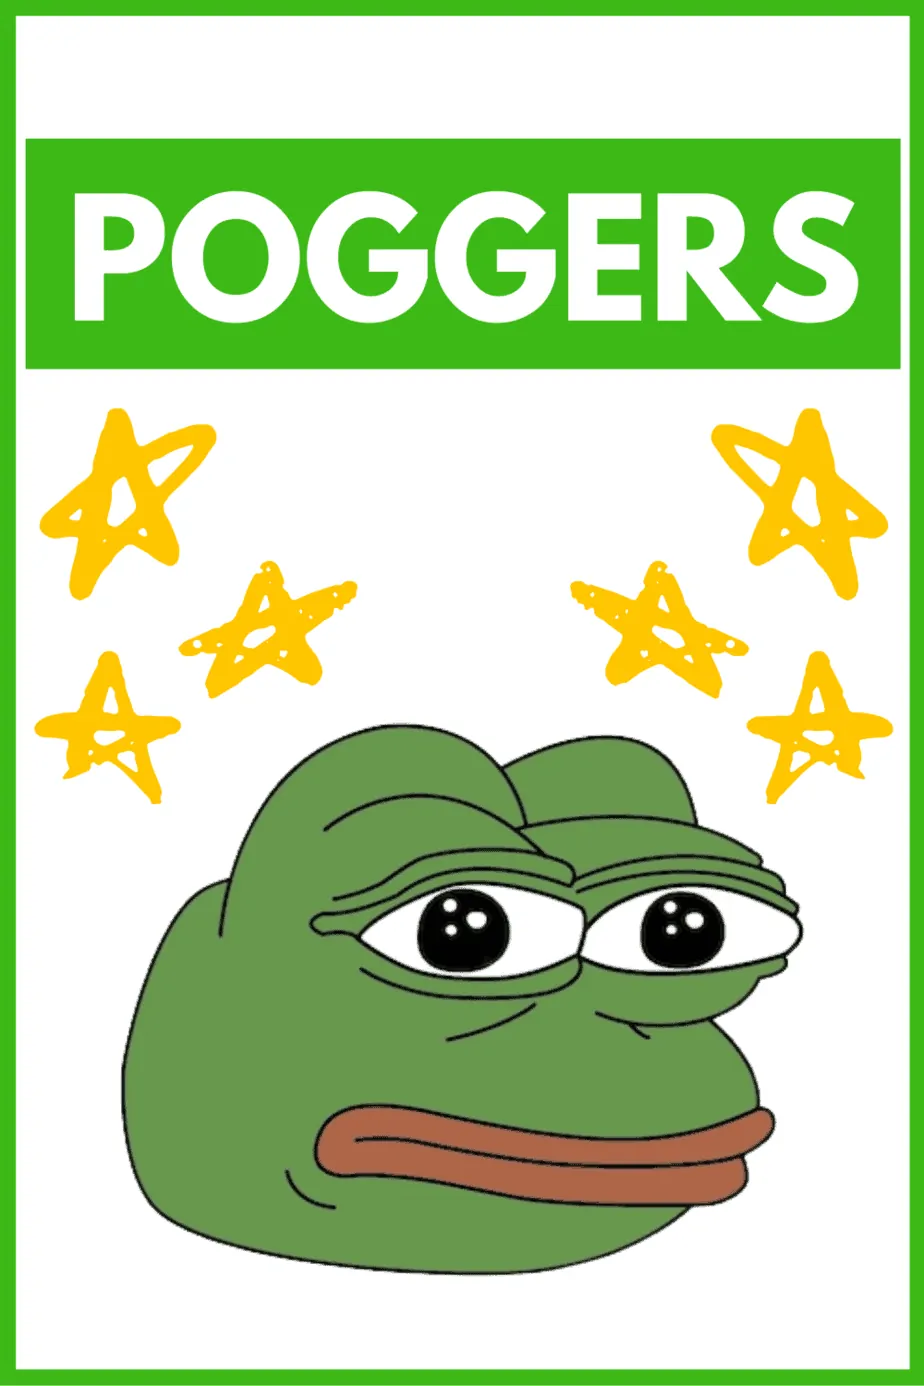 The Meaning of Poggers